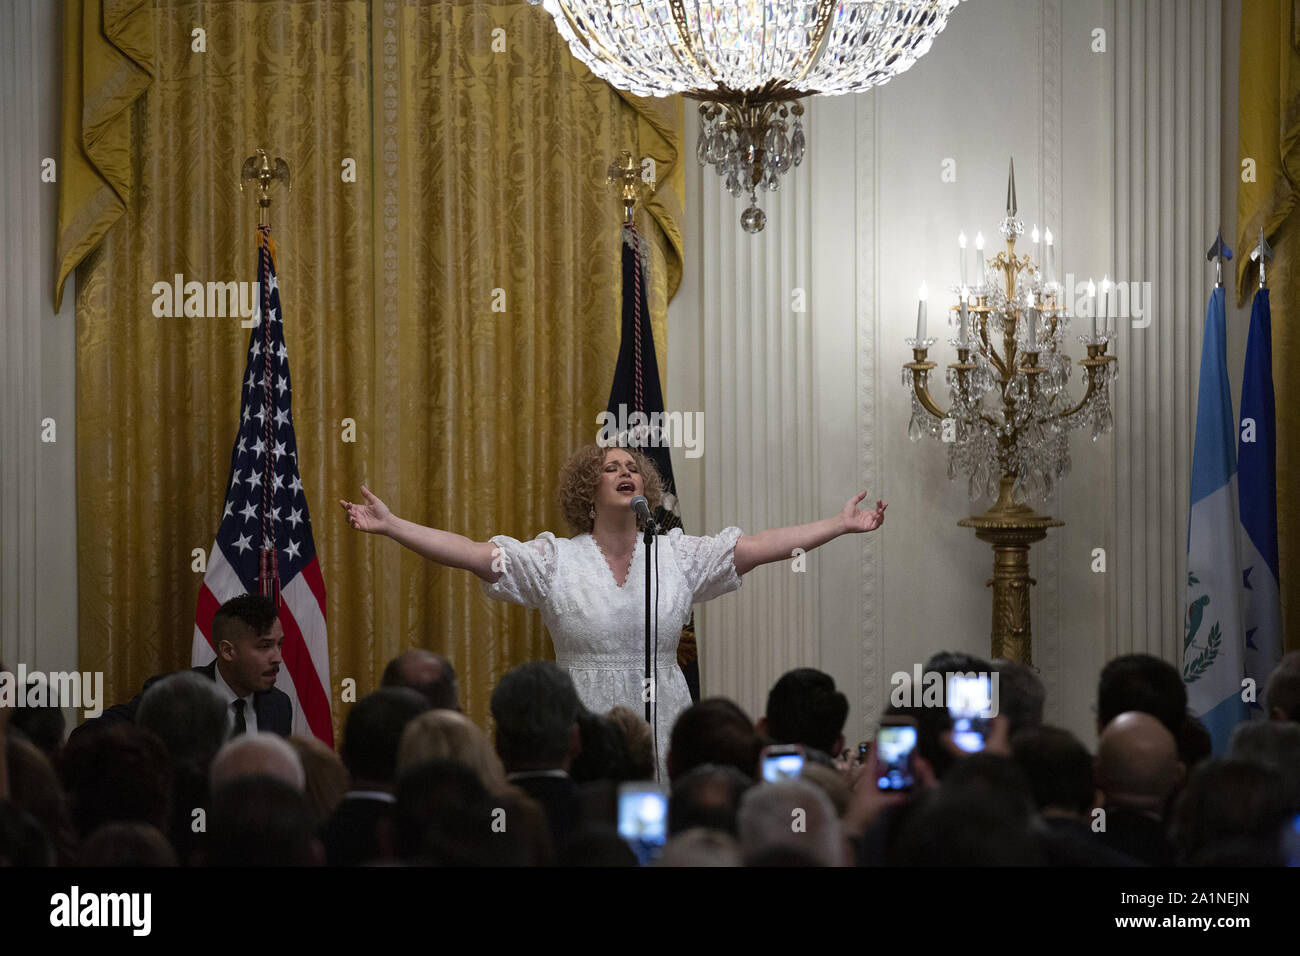 Washington, District of Columbia, USA. 27th Sep, 2019. Christine D'Clario sings during the Hispanic Heritage Month reception at the White House in Washington, DC, U.S. on September 27, 2019. Credit: Stefani Reynolds/CNP/ZUMA Wire/Alamy Live News Stock Photo